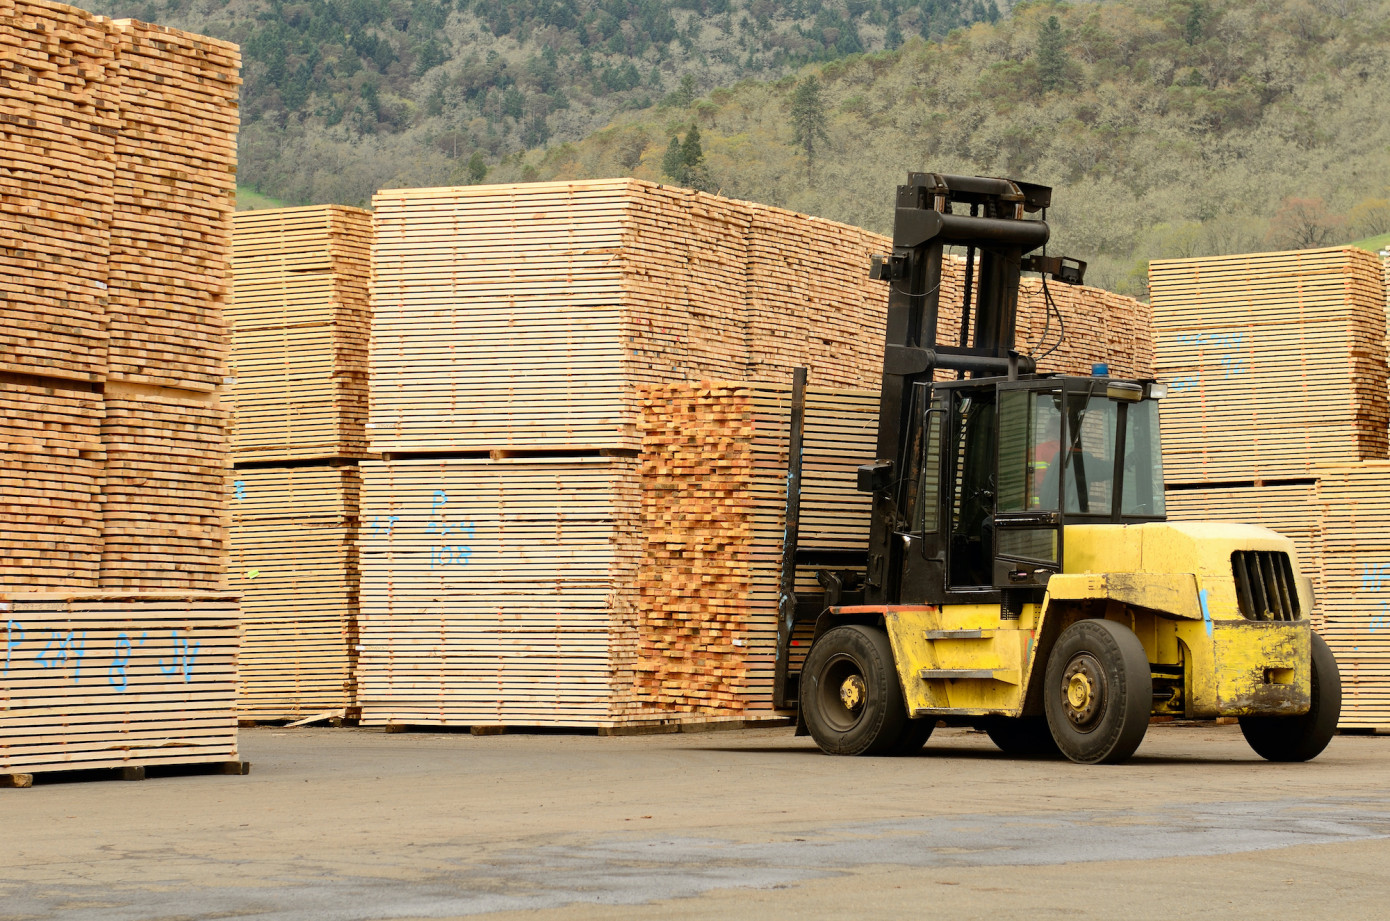 US softwood lumber production increased by 5% in January-February 2020